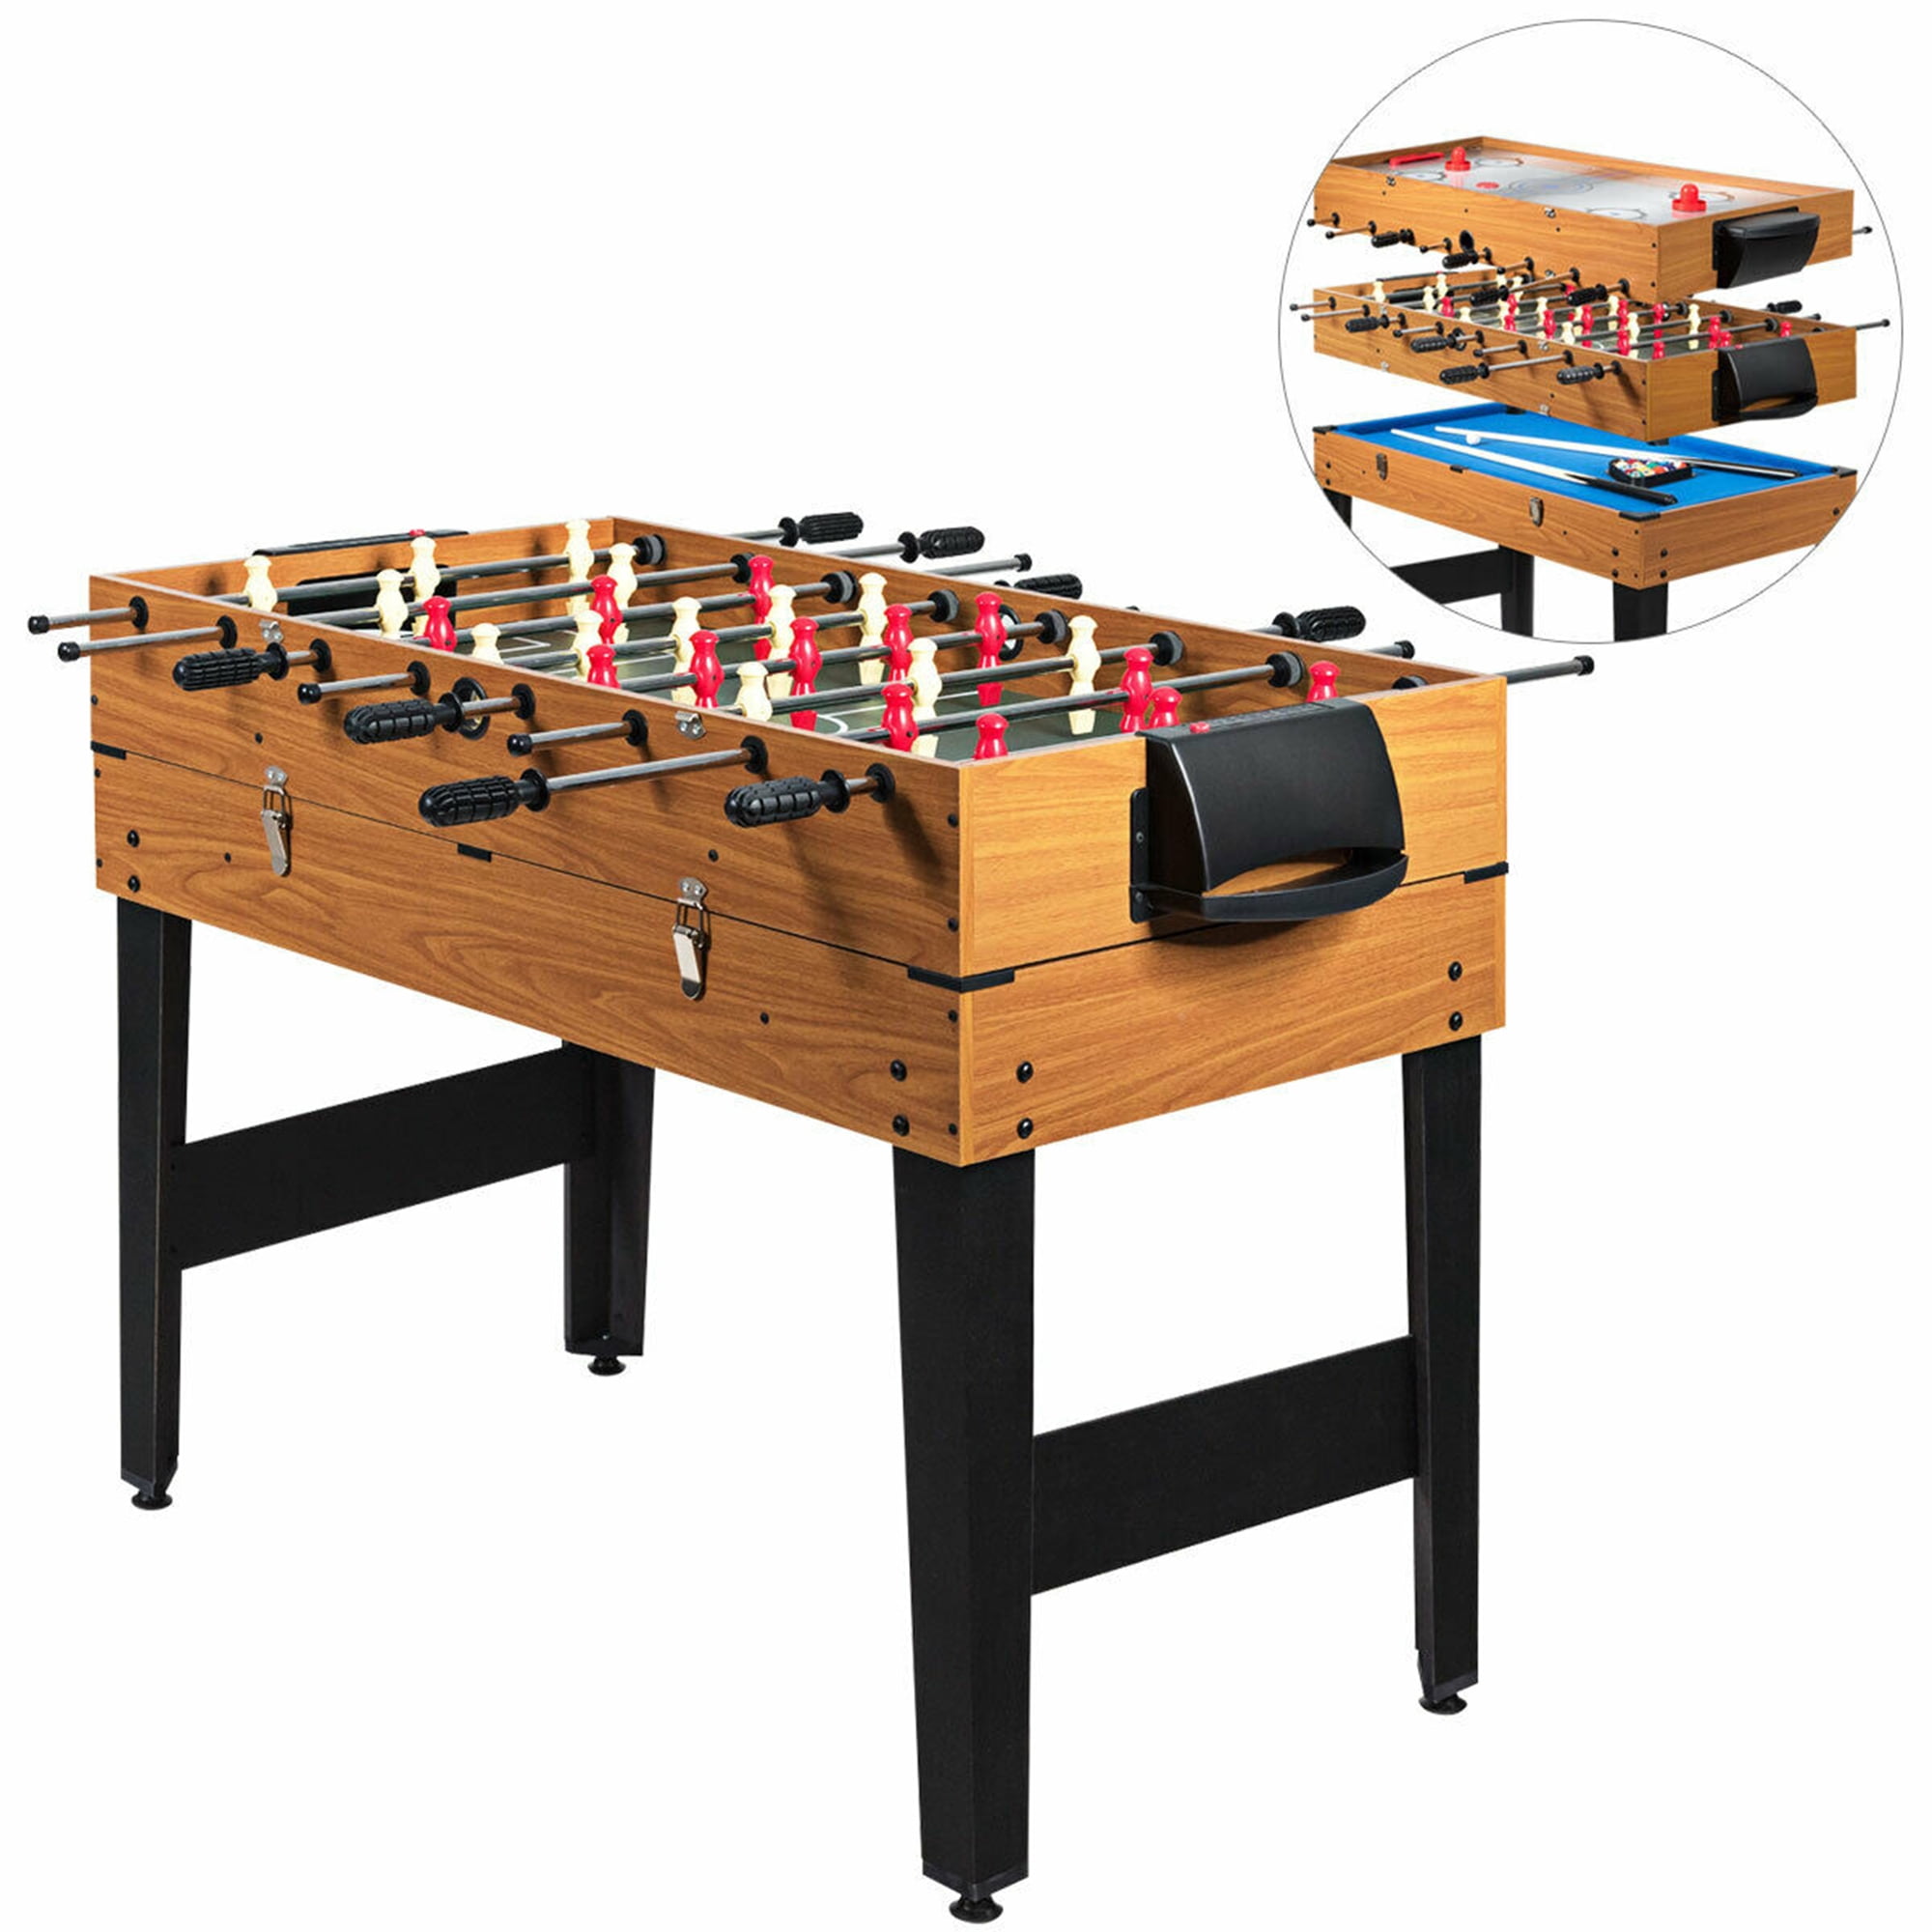 Carmelli Playmaker 3-in-1 Foosball Multi-Game Table with Soccer and Hockey Practice Goals 